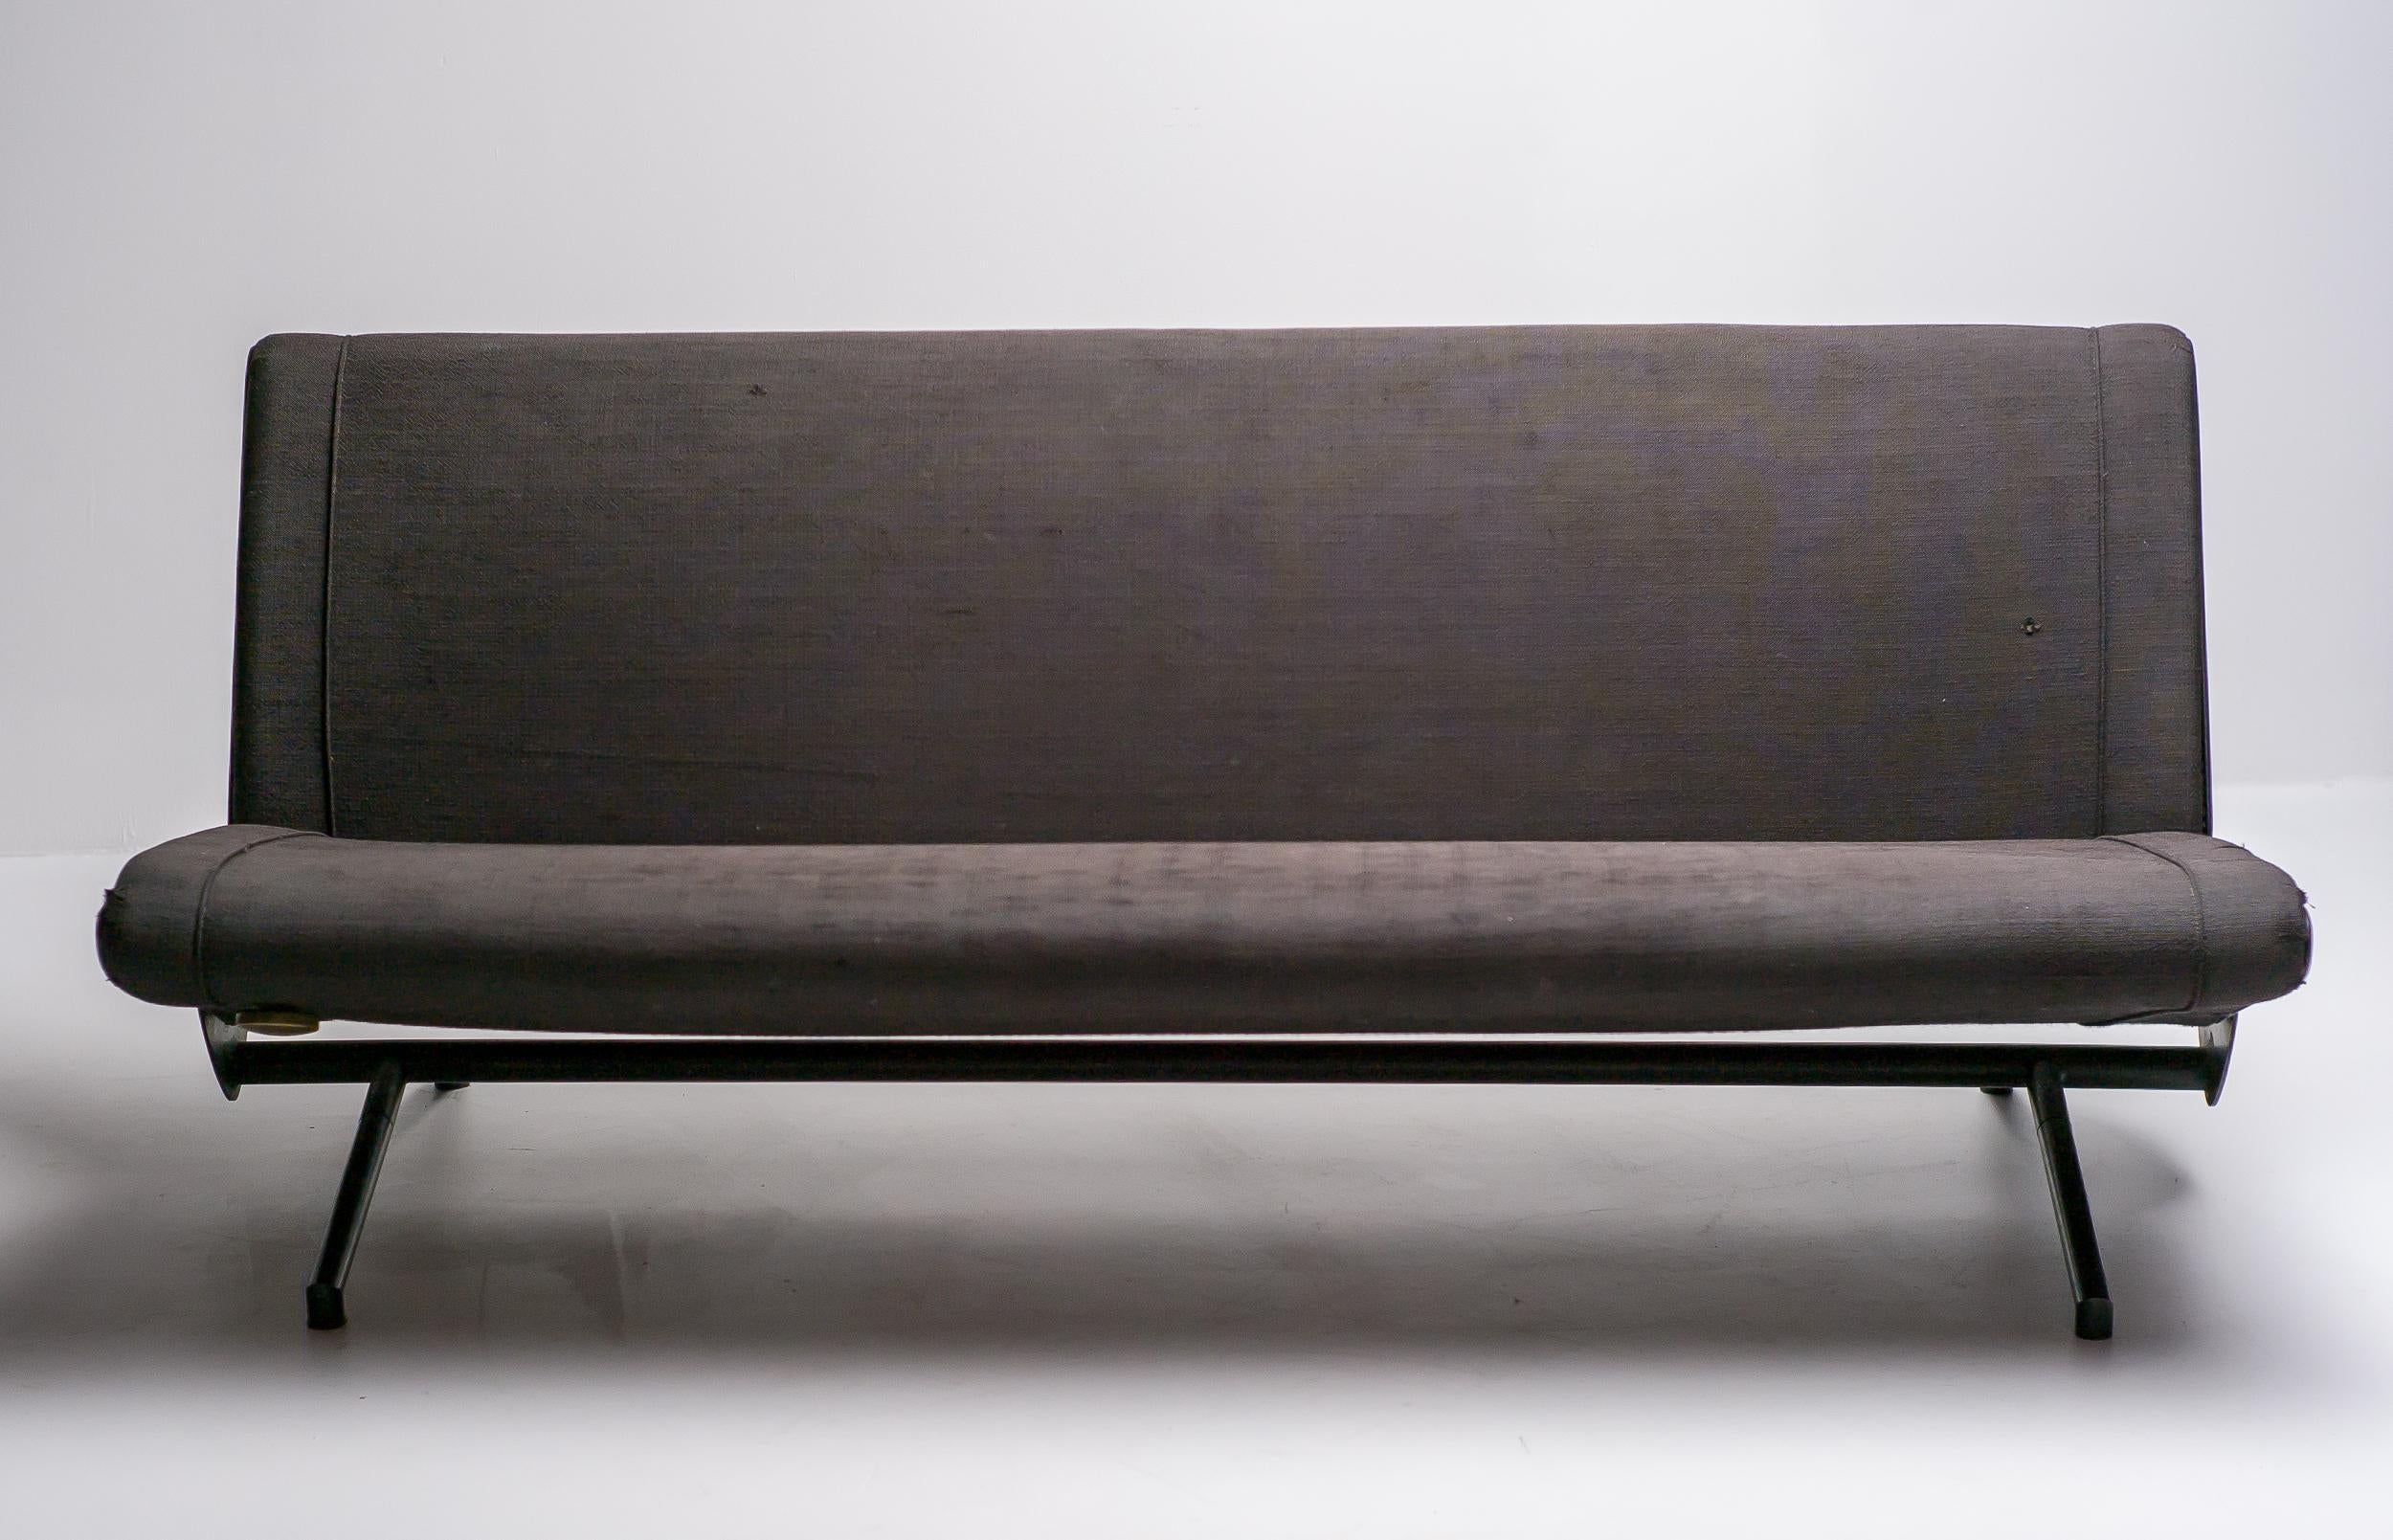 Osvaldo Borsani for Tecno sofa 'D70', enameled steel base, brass hardware, charcoal/brown fabric upholstery. 
Osvaldo Borsani's sofa 'D70' was presented at the Triennale of Milan in 1954 where it won the Gold Medal for design. Not only the design